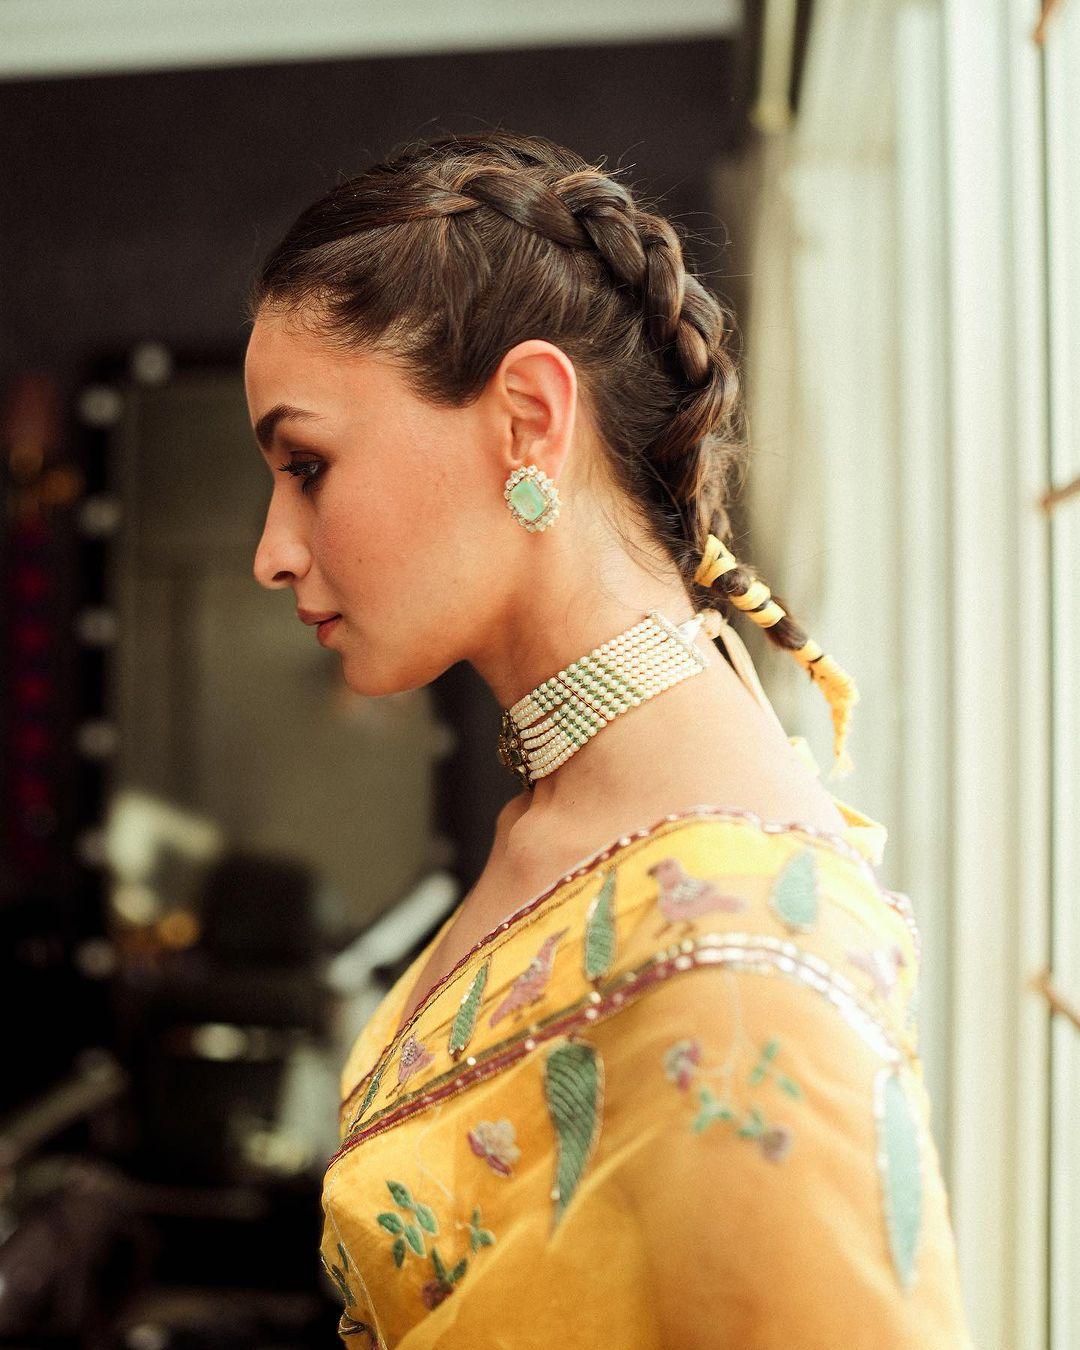 Completing her look, she adorned herself with a necklace and earrings. Alia styled her hair in a short braid for the photoshoot